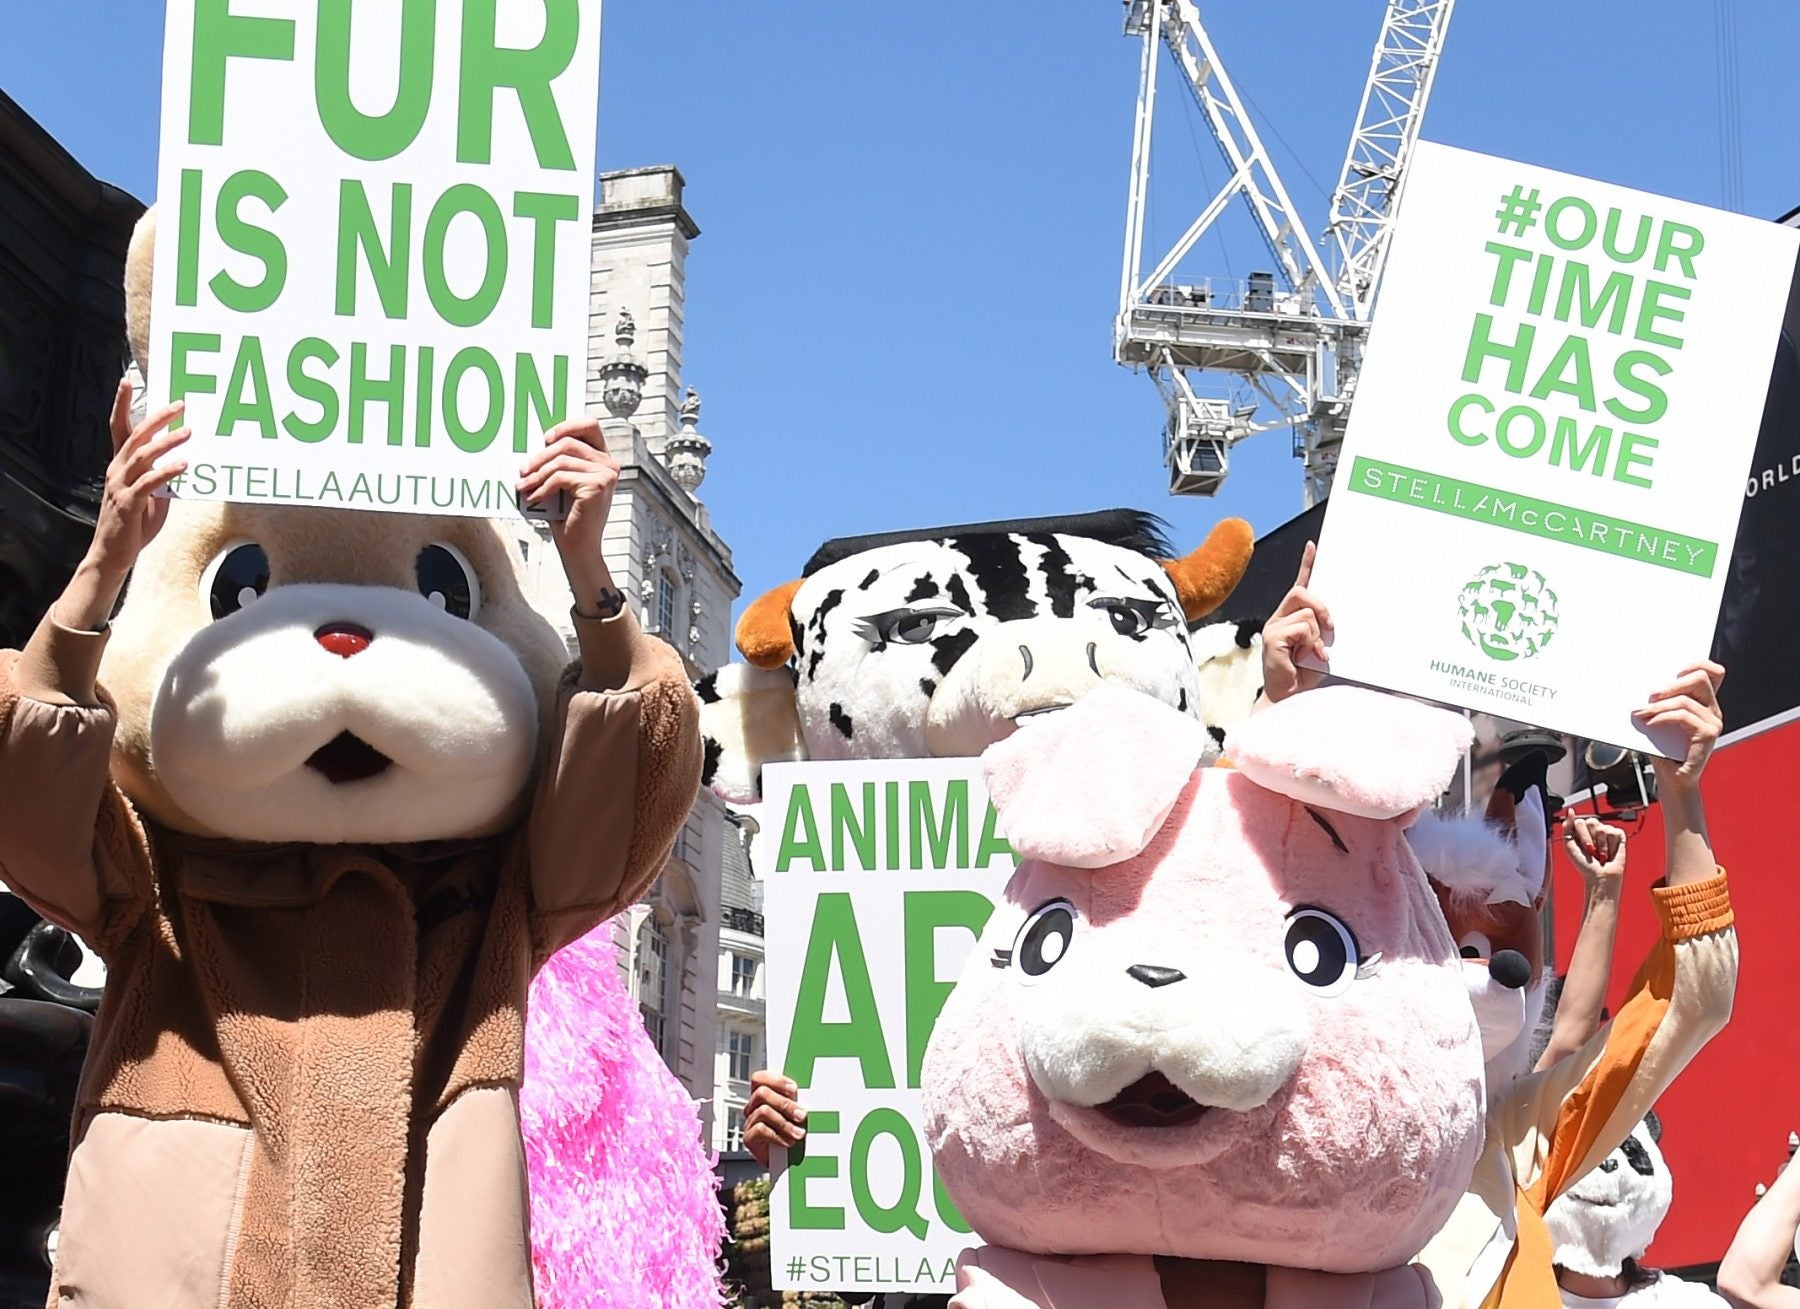 Celebrities join Stella McCartney and Humane Society International campaign  to end fur cruelty in fashion - Humane Society International